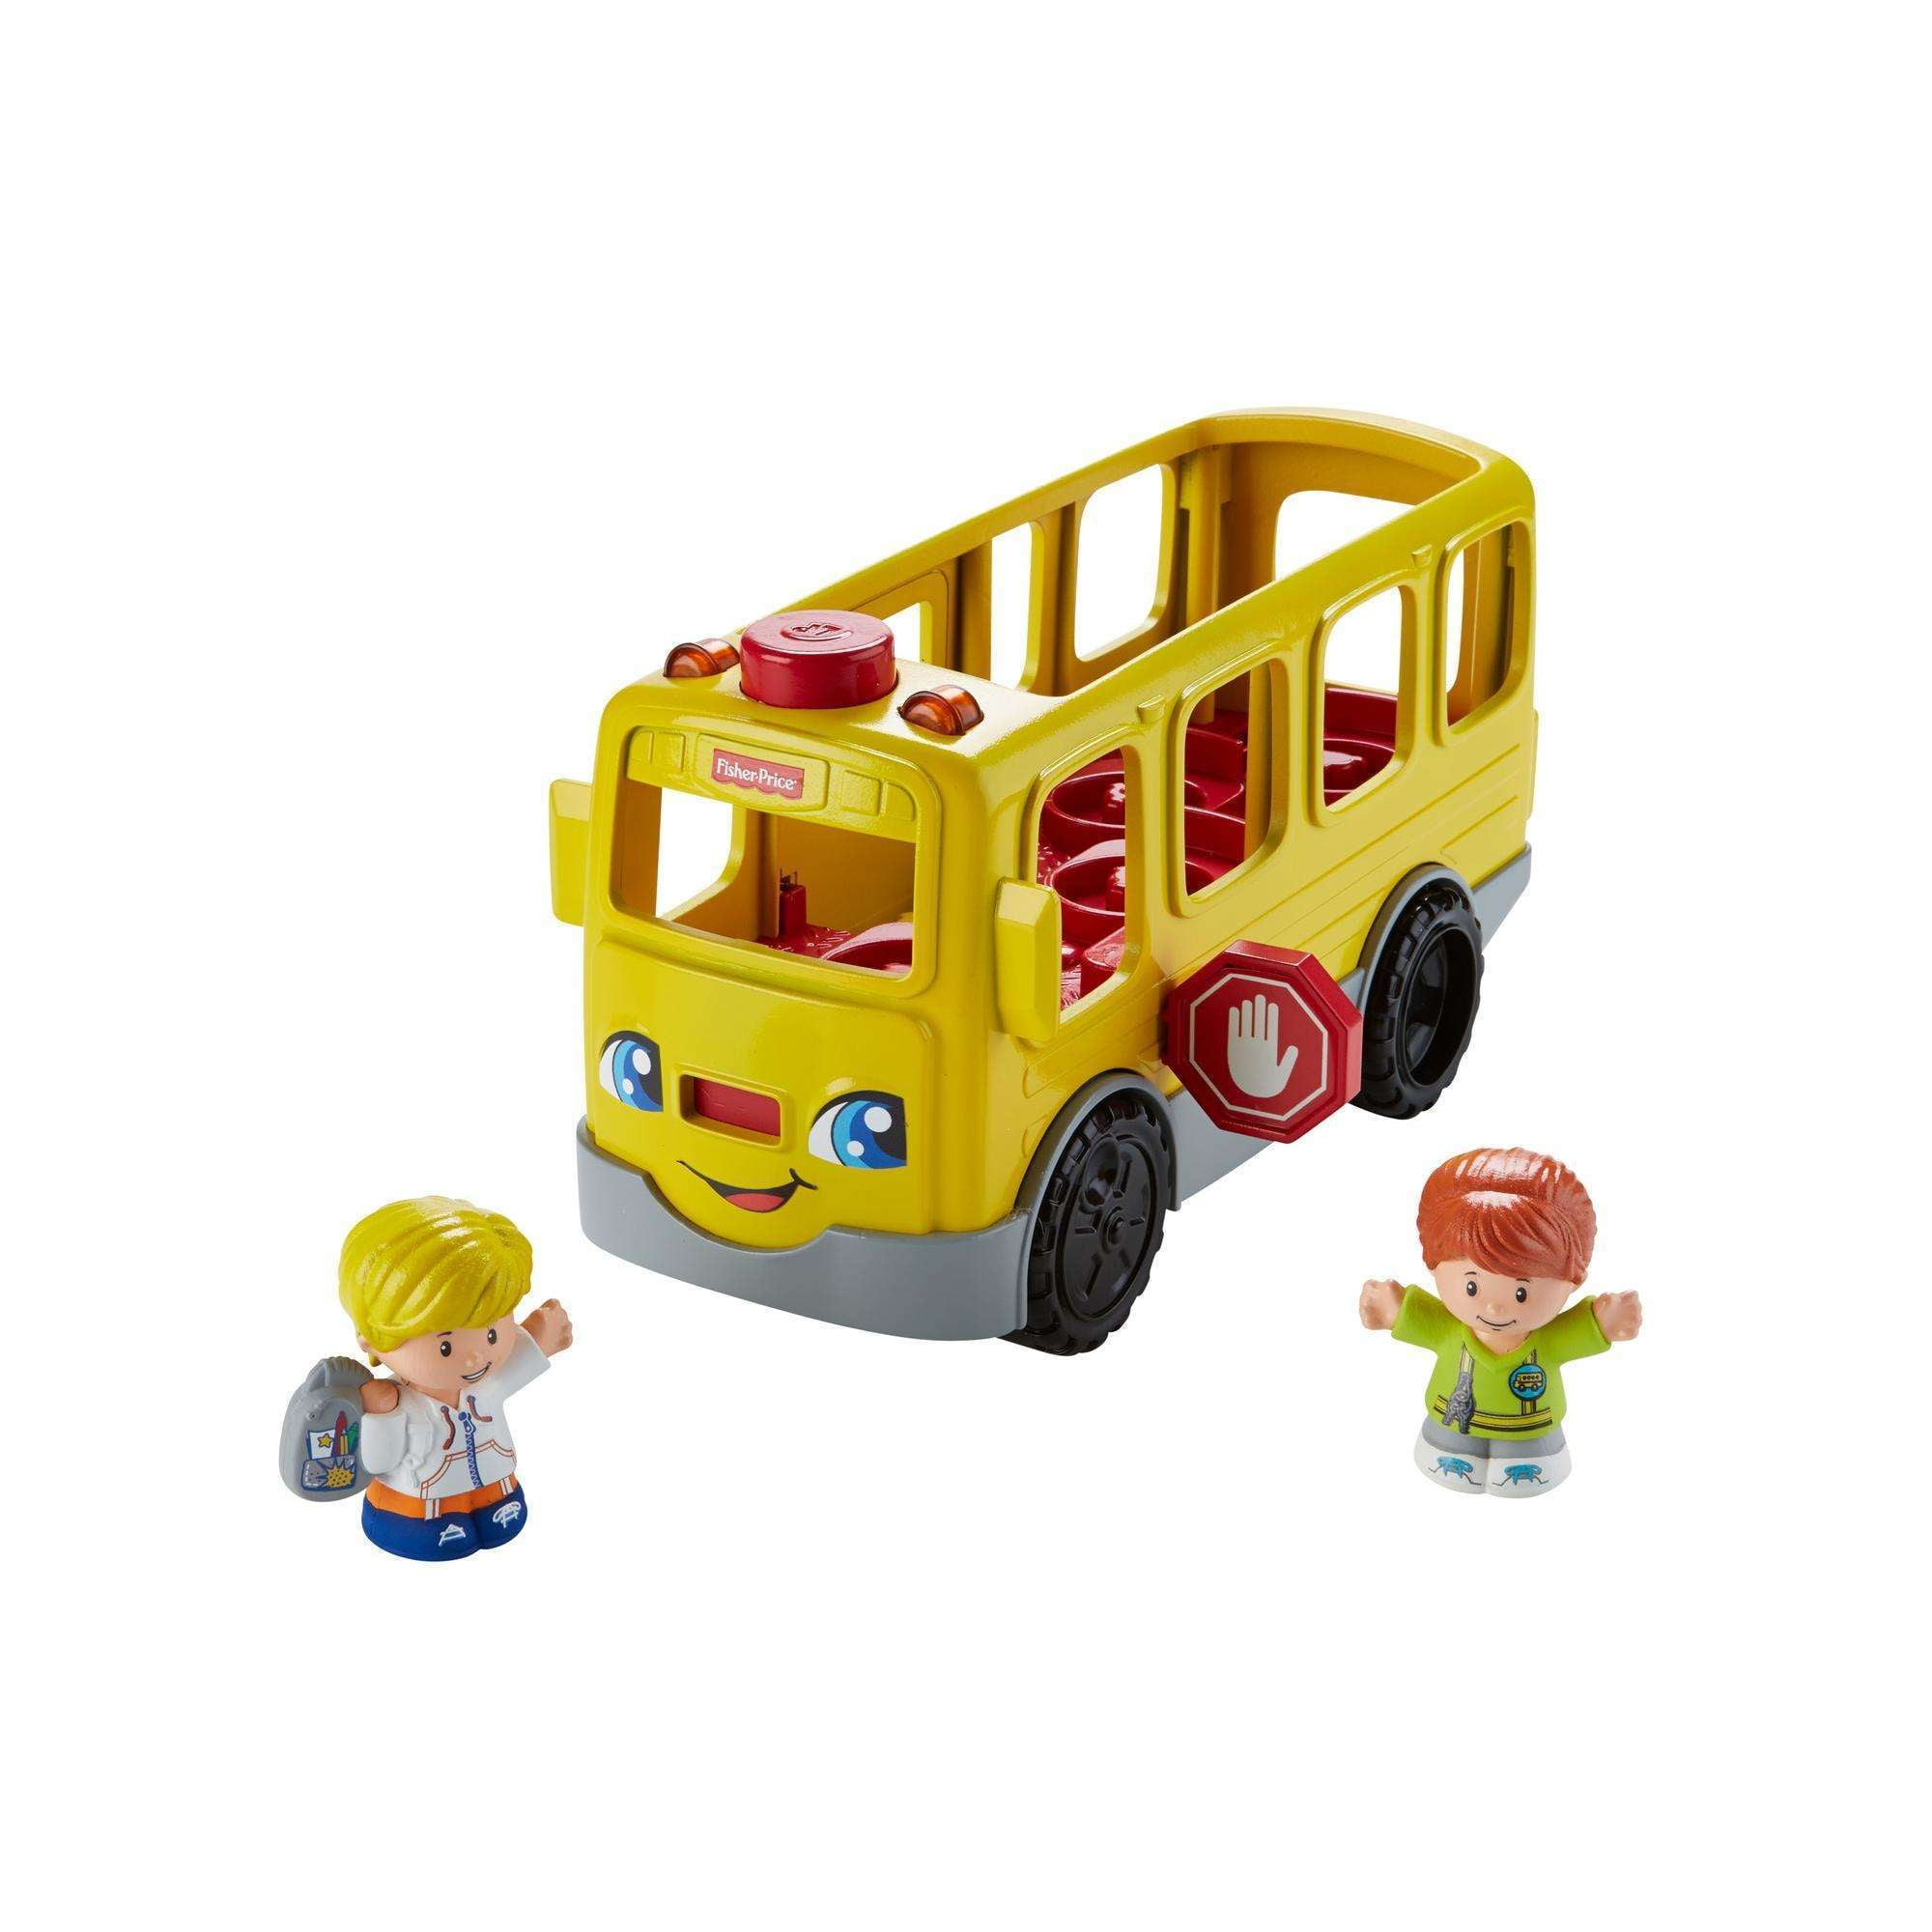 play school toys with price